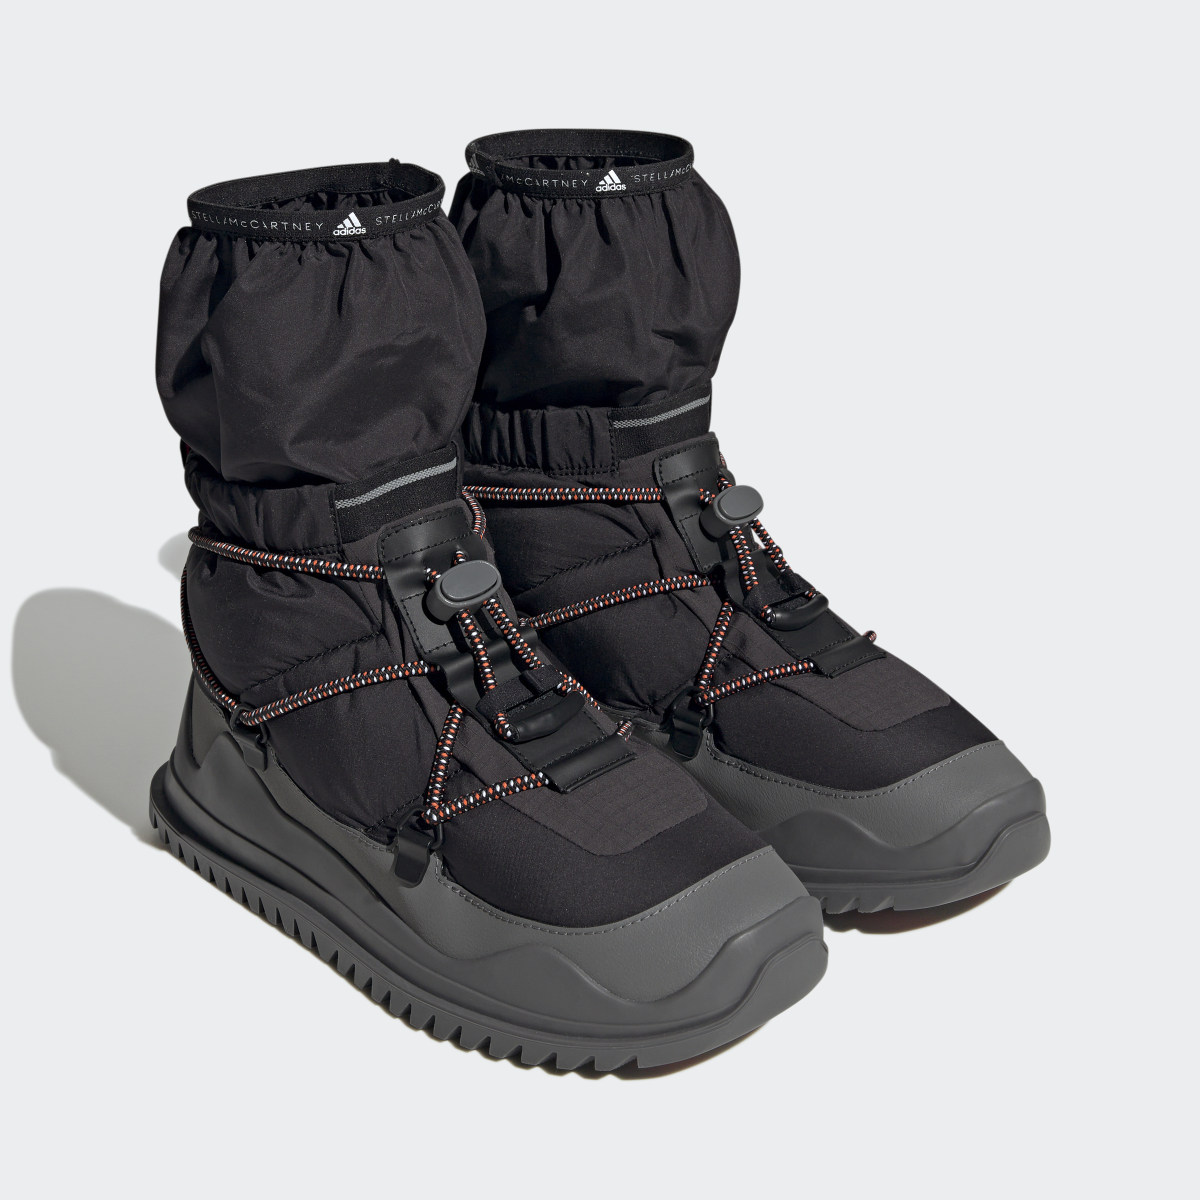 Adidas by Stella McCartney COLD.RDY Winter Boots. 5